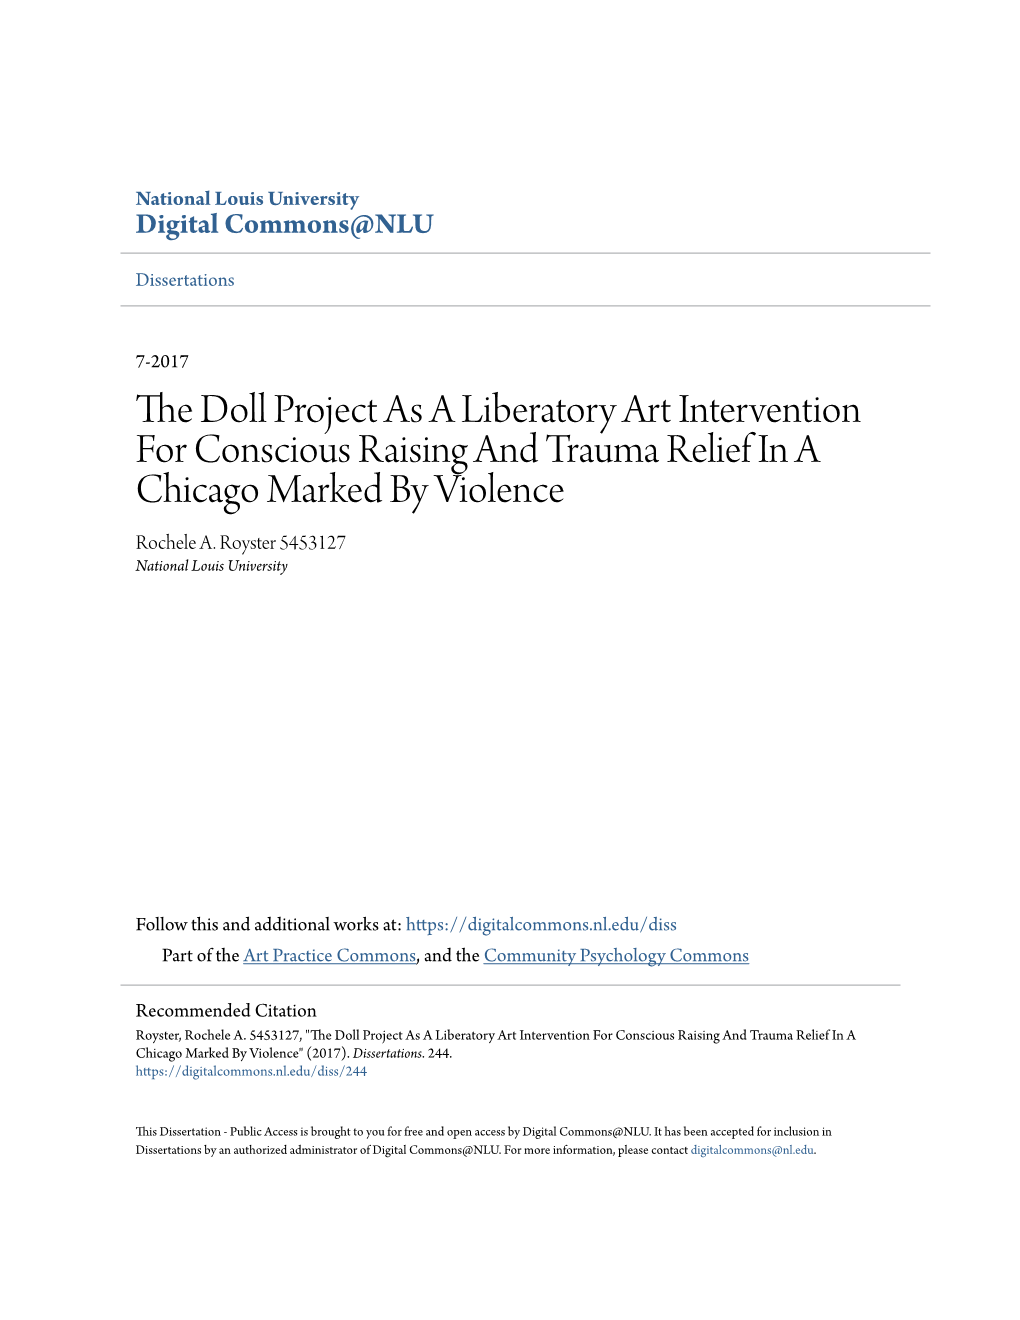 The Doll Project As a Liberatory Art Intervention for Conscious Raising And